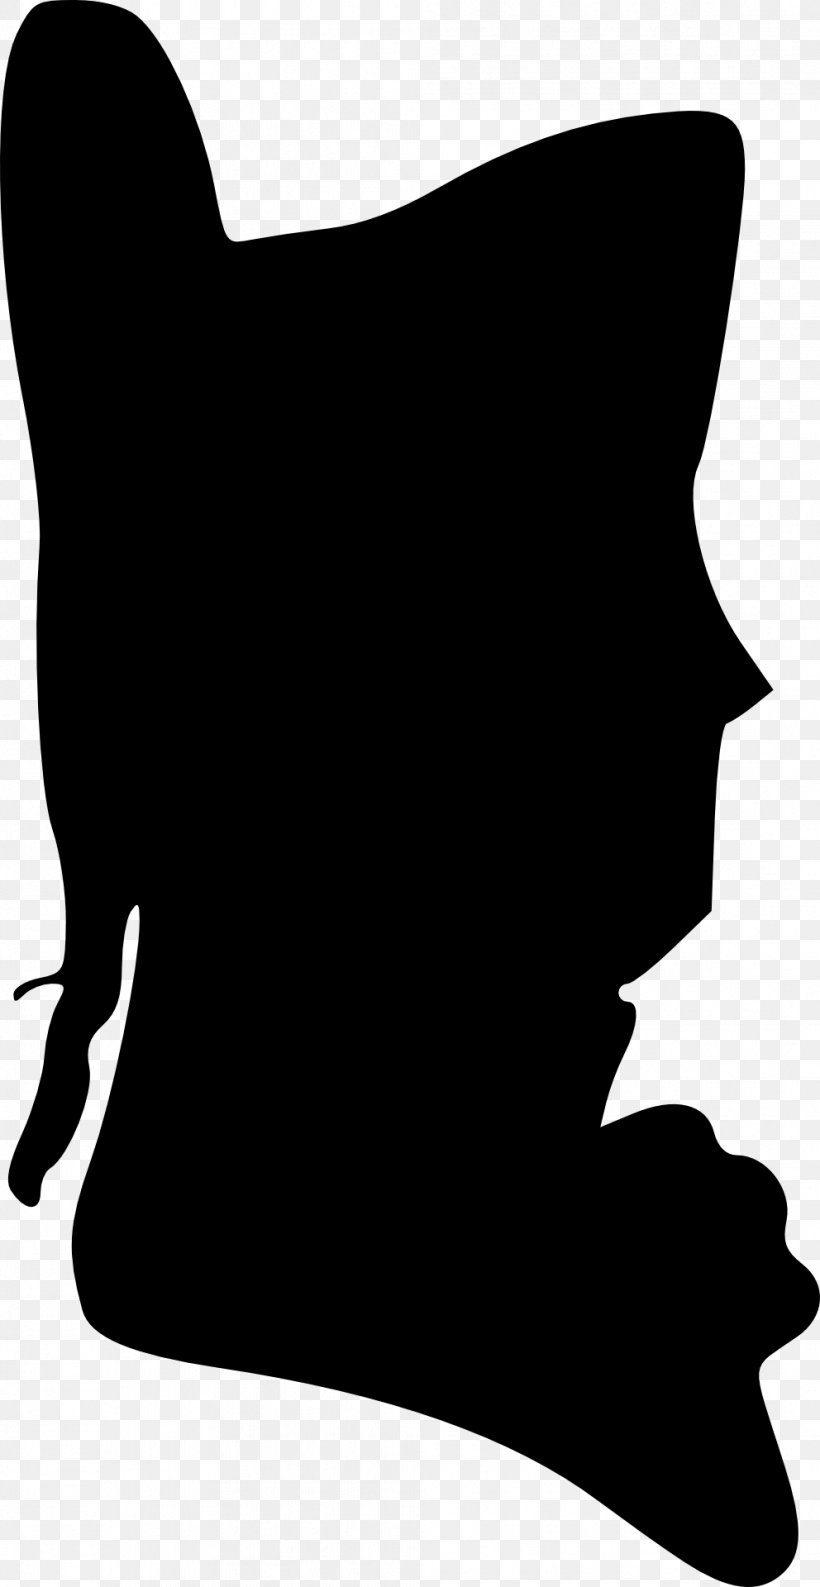 Silhouette Person Black And White, PNG, 992x1920px, Silhouette, Black, Black And White, Monochrome, Monochrome Photography Download Free